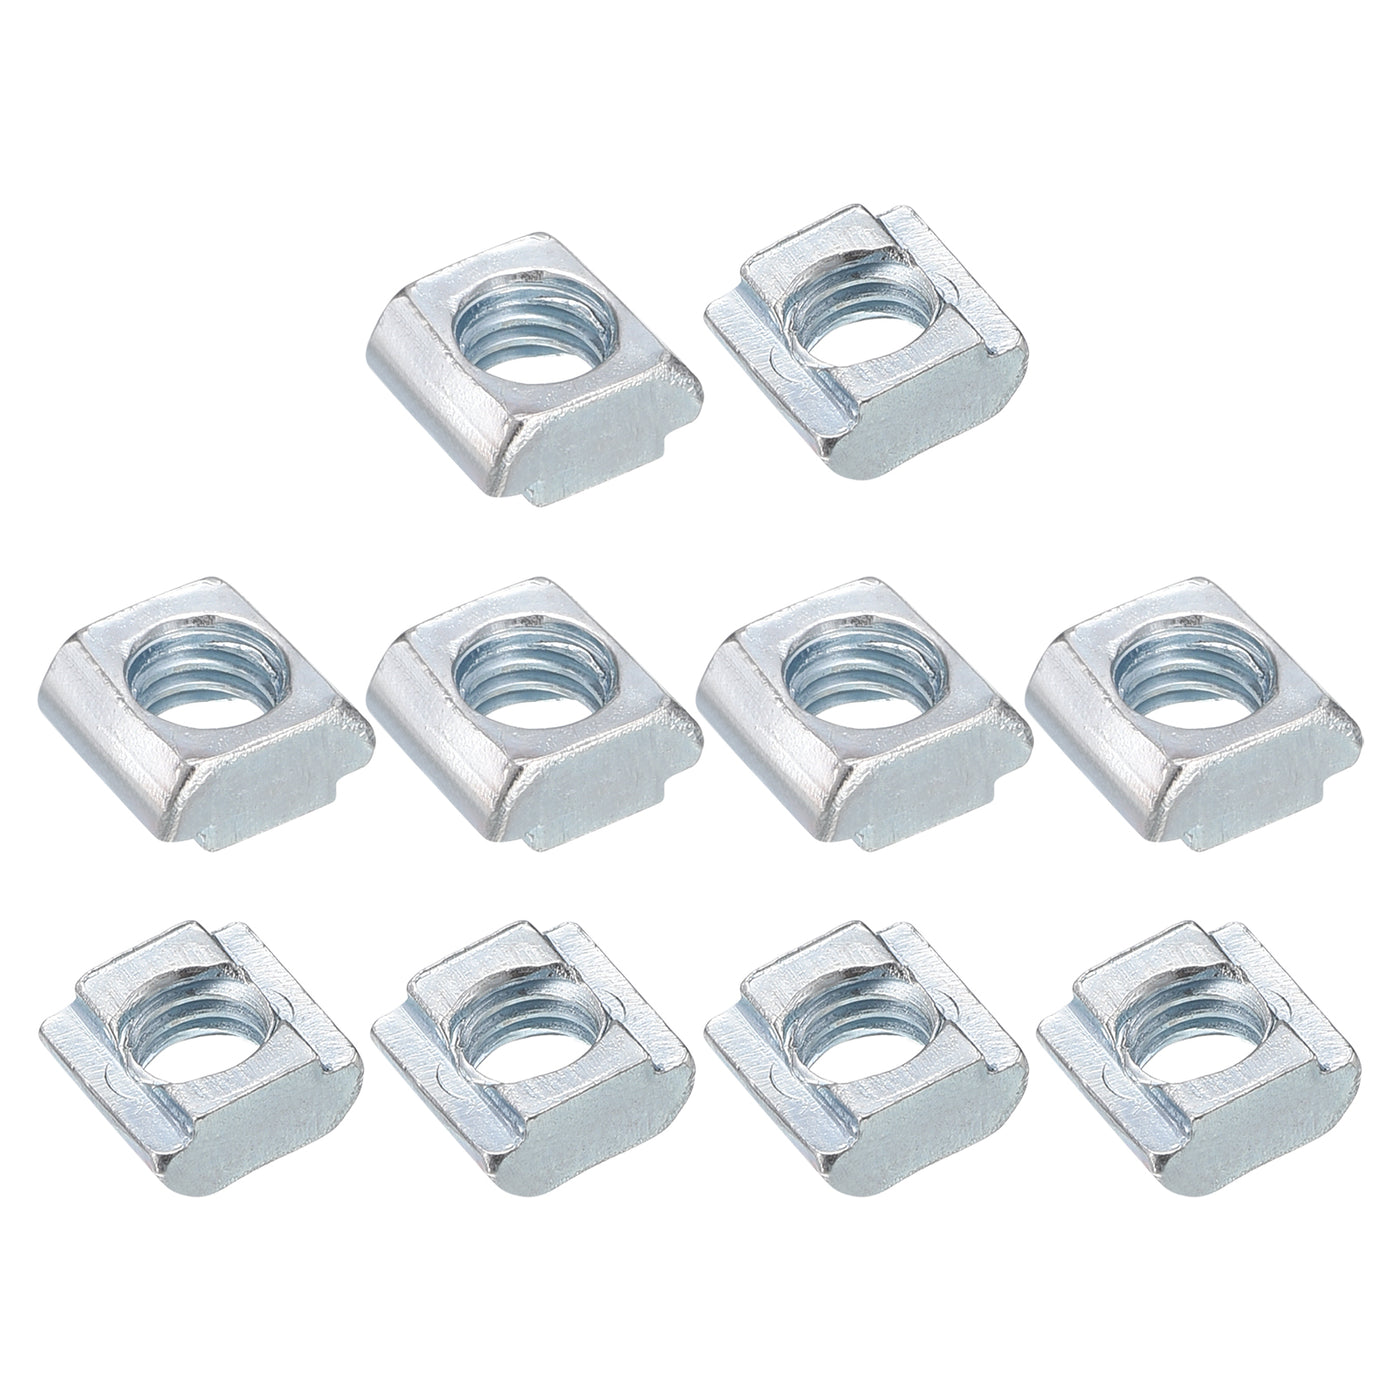 uxcell Uxcell T Nuts, 30pcs - Nickel Plated Carbon Steel T Slot Bolts, 2020 Series M6 Hammer Head Fastener, Sliding T Nuts for Aluminum Extrusion Profile (Silver)